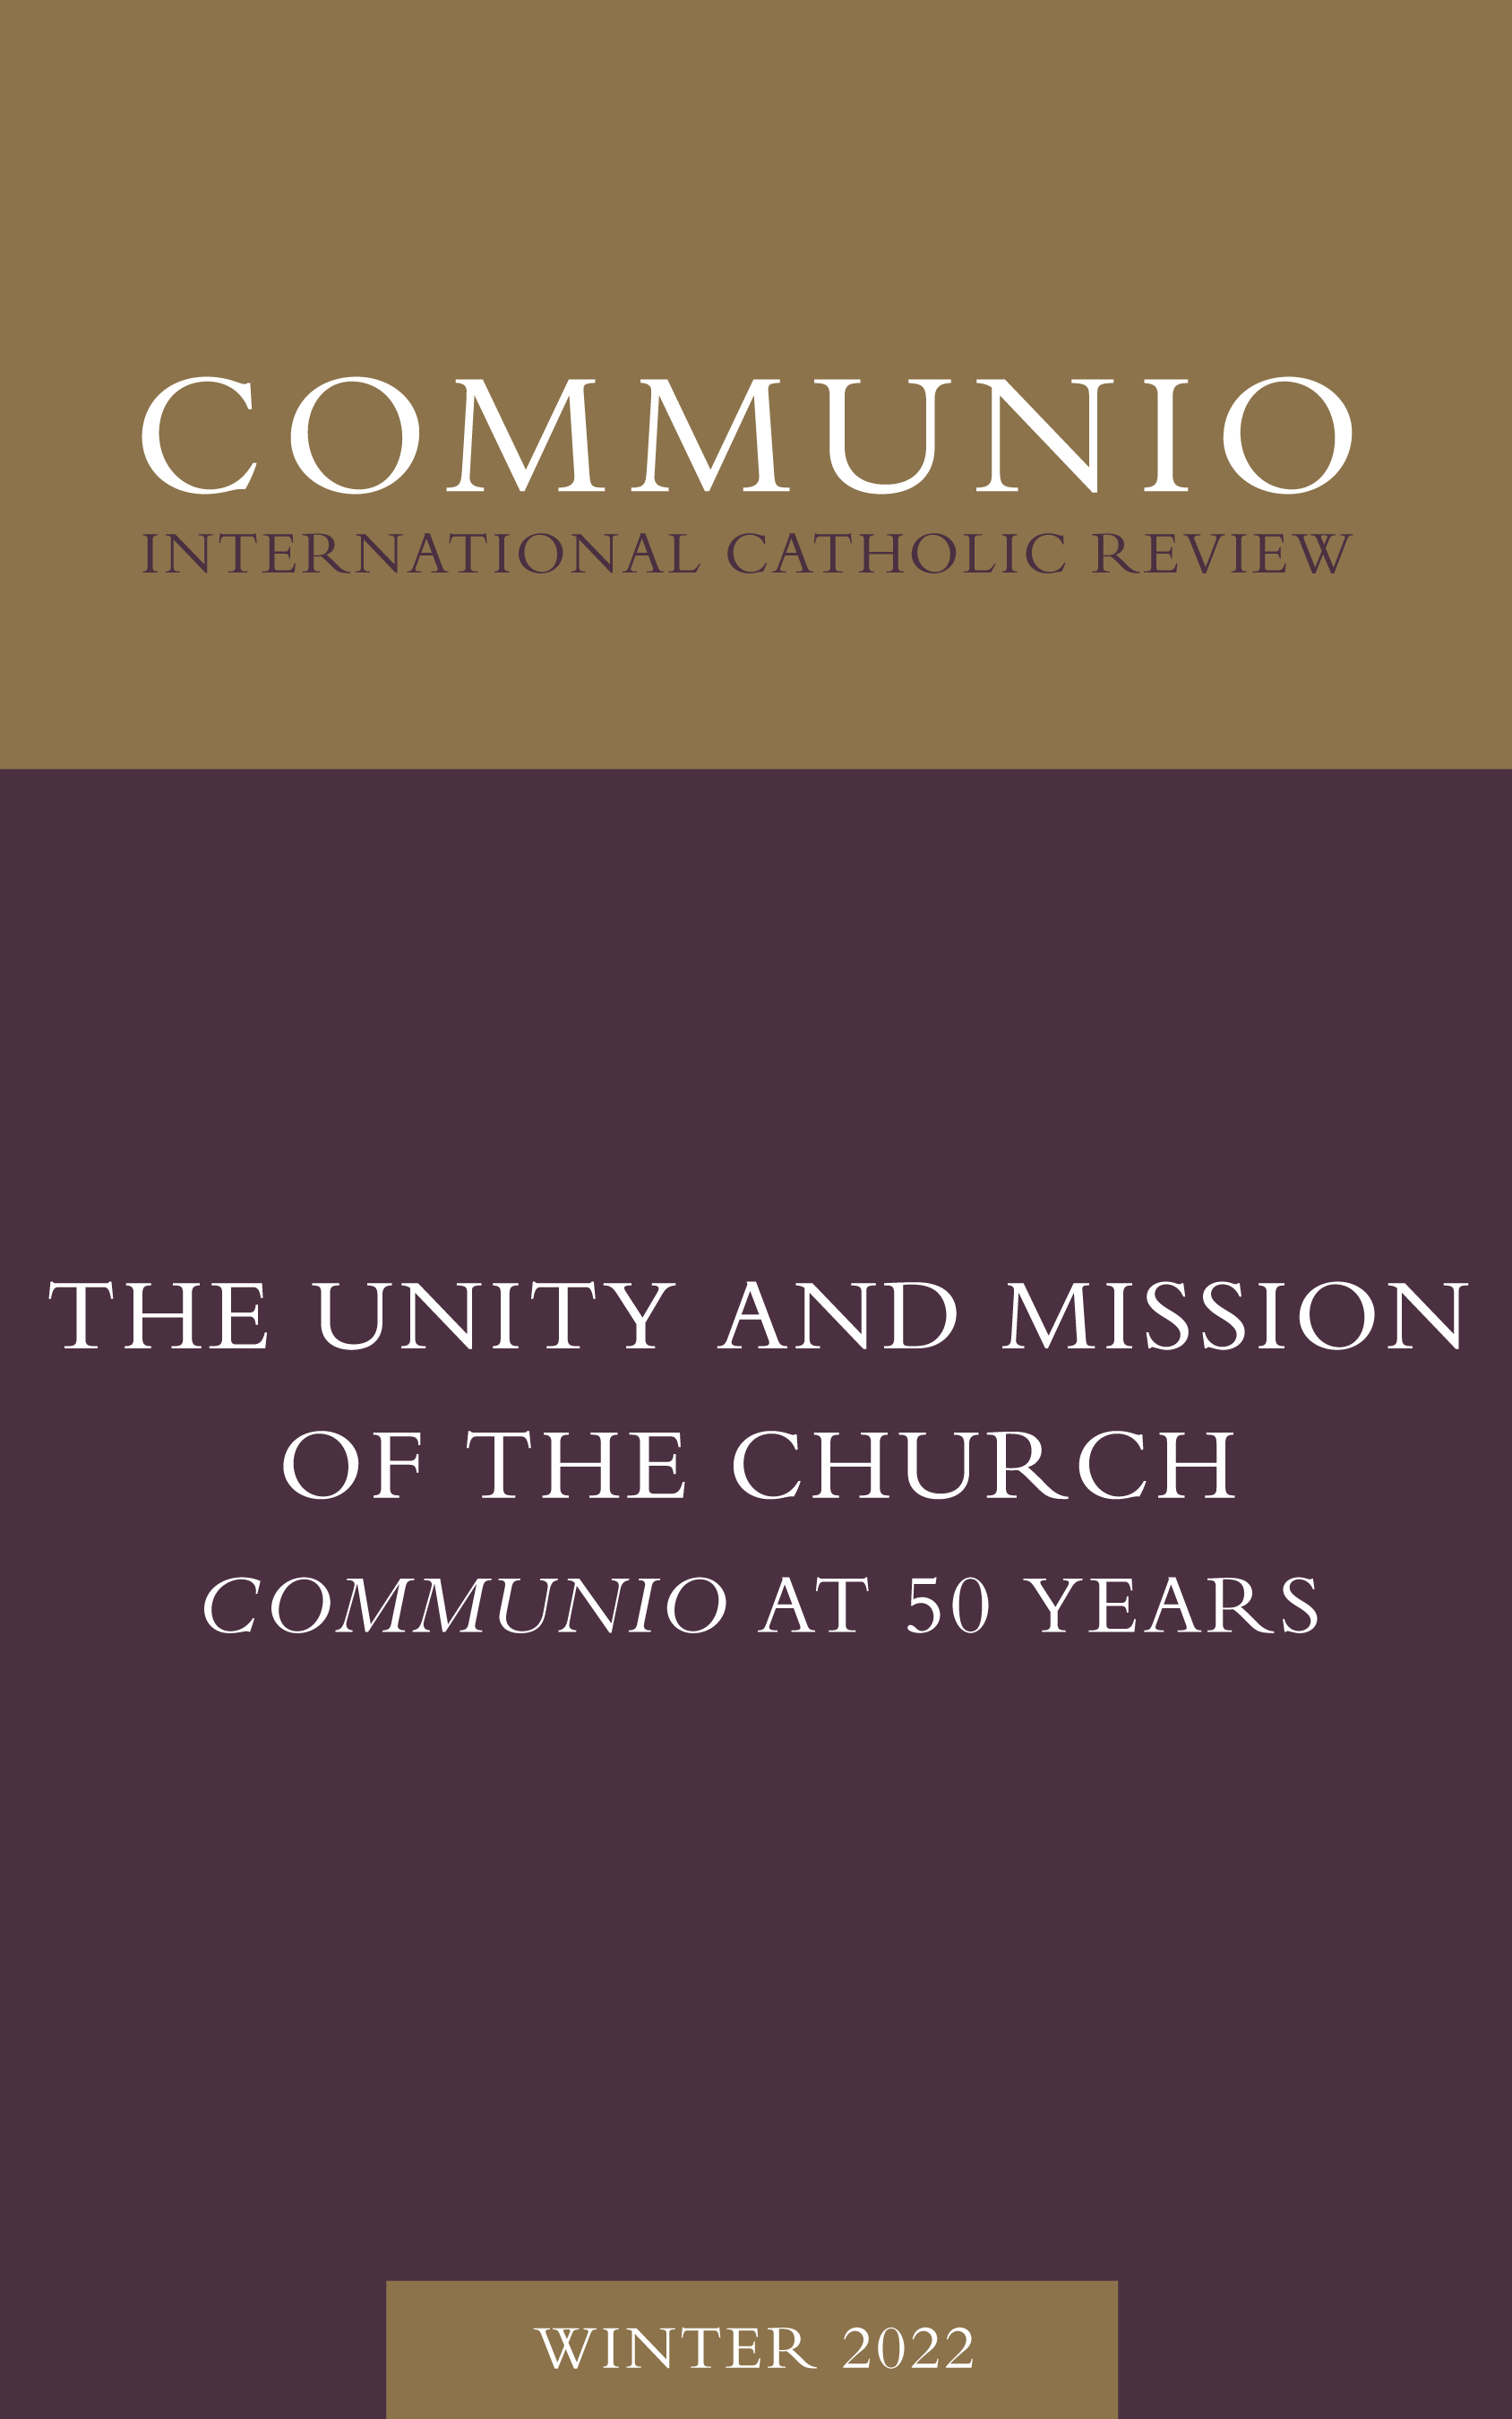 Communio - Winter 2022 - The Unity and Mission of the Church: Communio at 50 Years